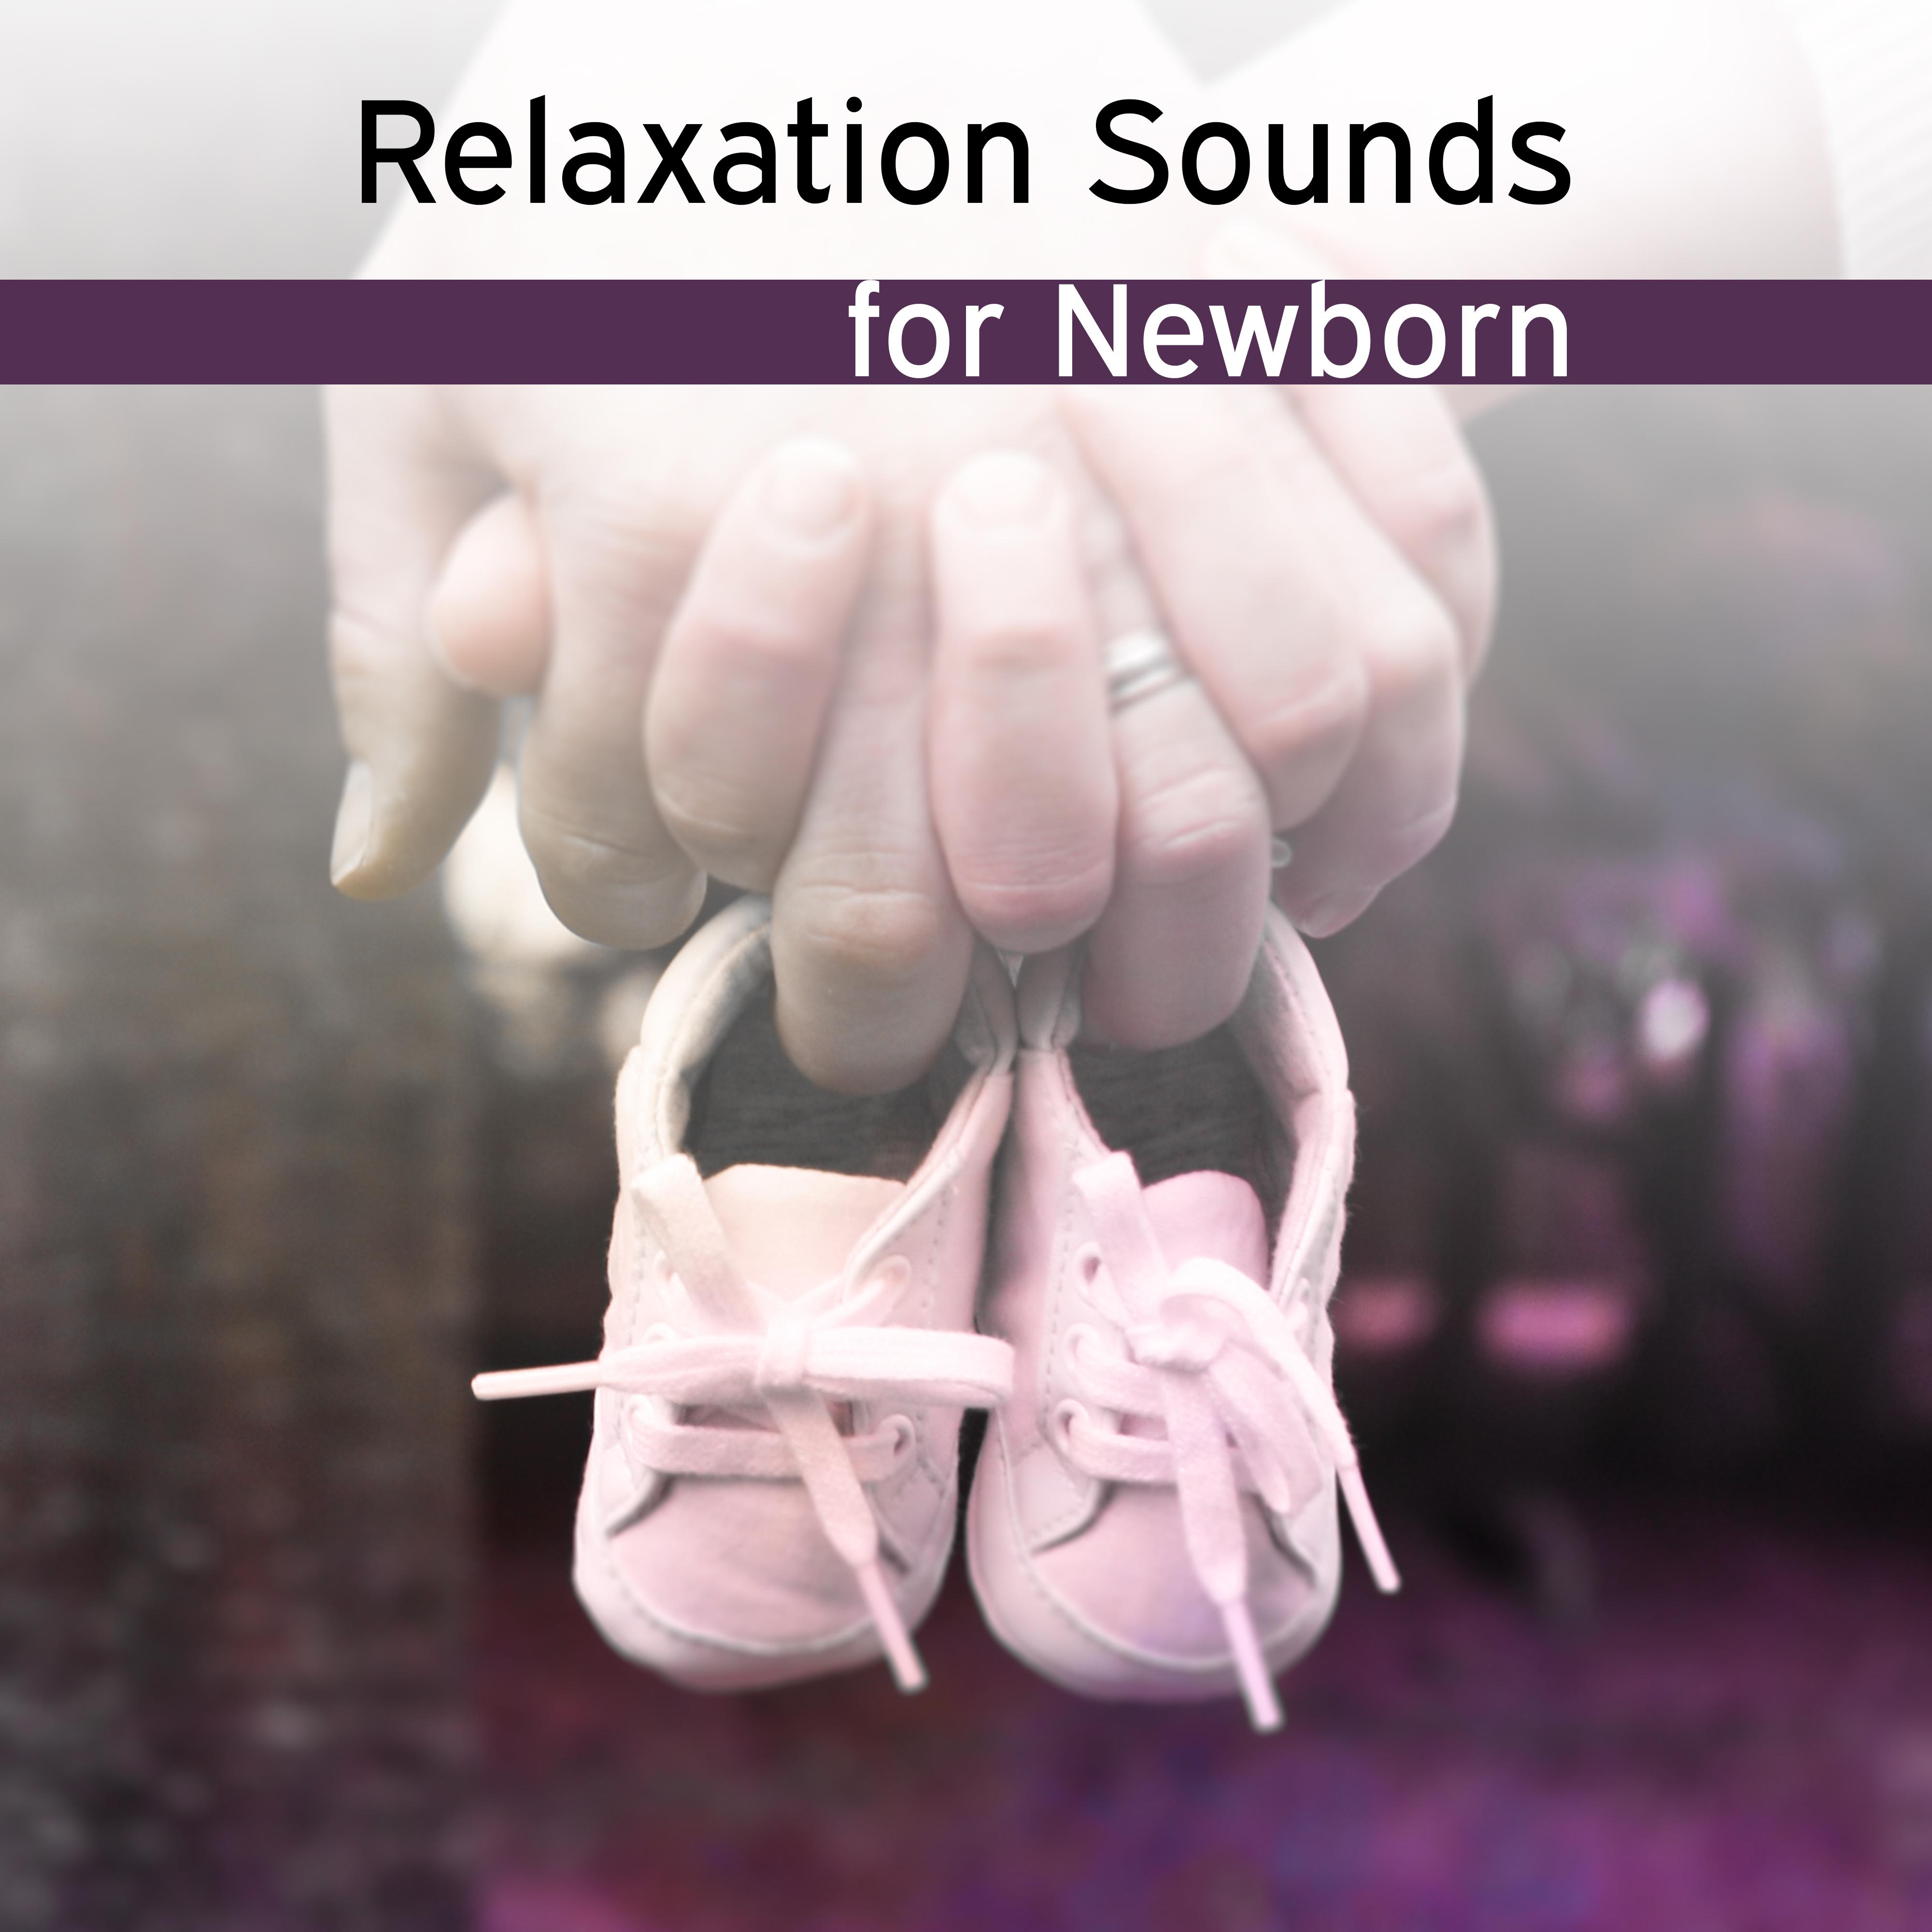 Relaxation Sounds for Newborn  Baby Music, Calm Lullaby, Instrumental Music at Goodnight, Bedtime, Haydn